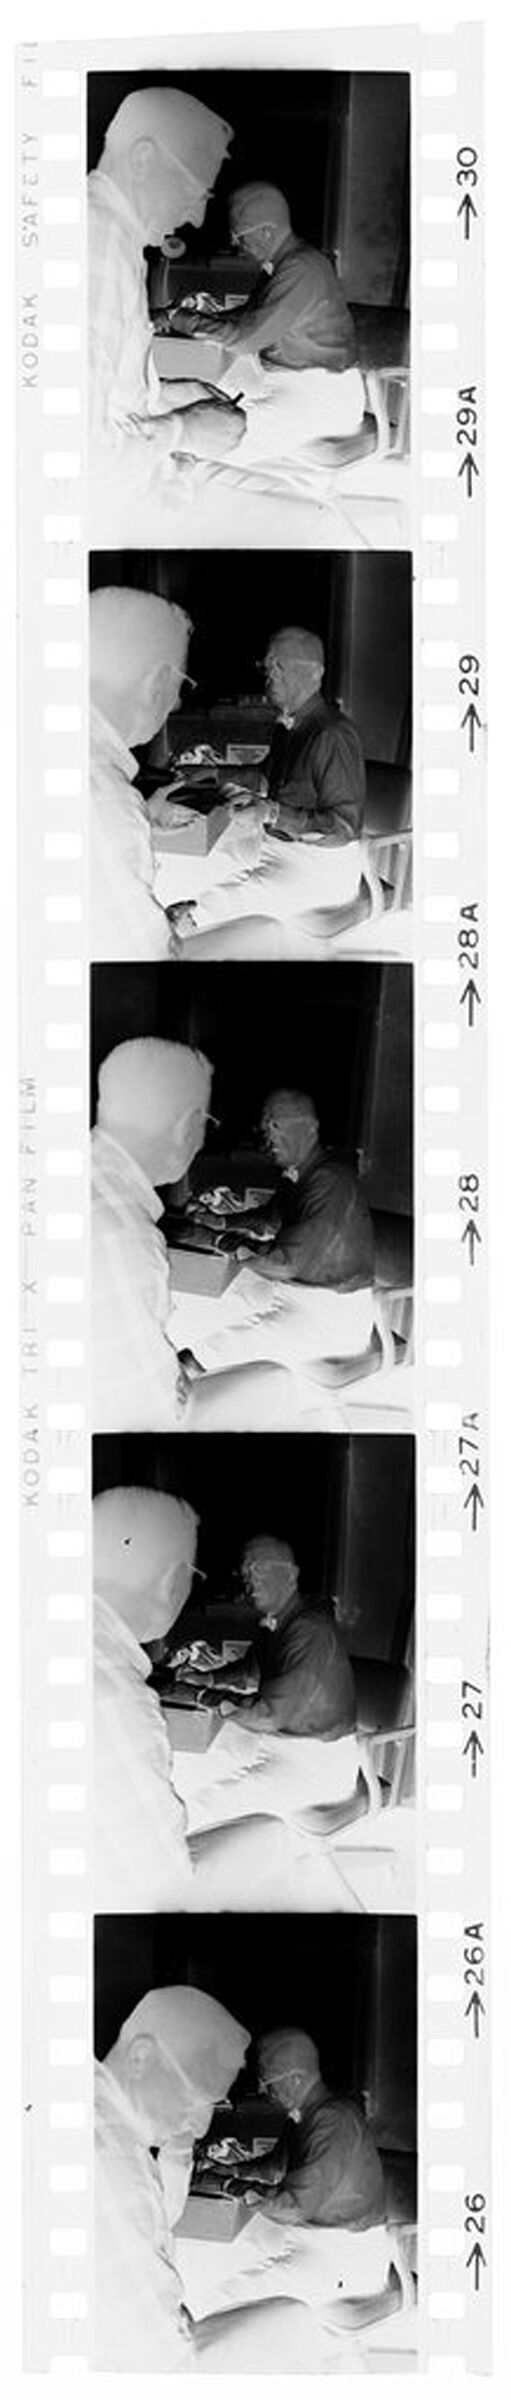 Untitled (Dr. Herman M. Juergens Talking With Patient)